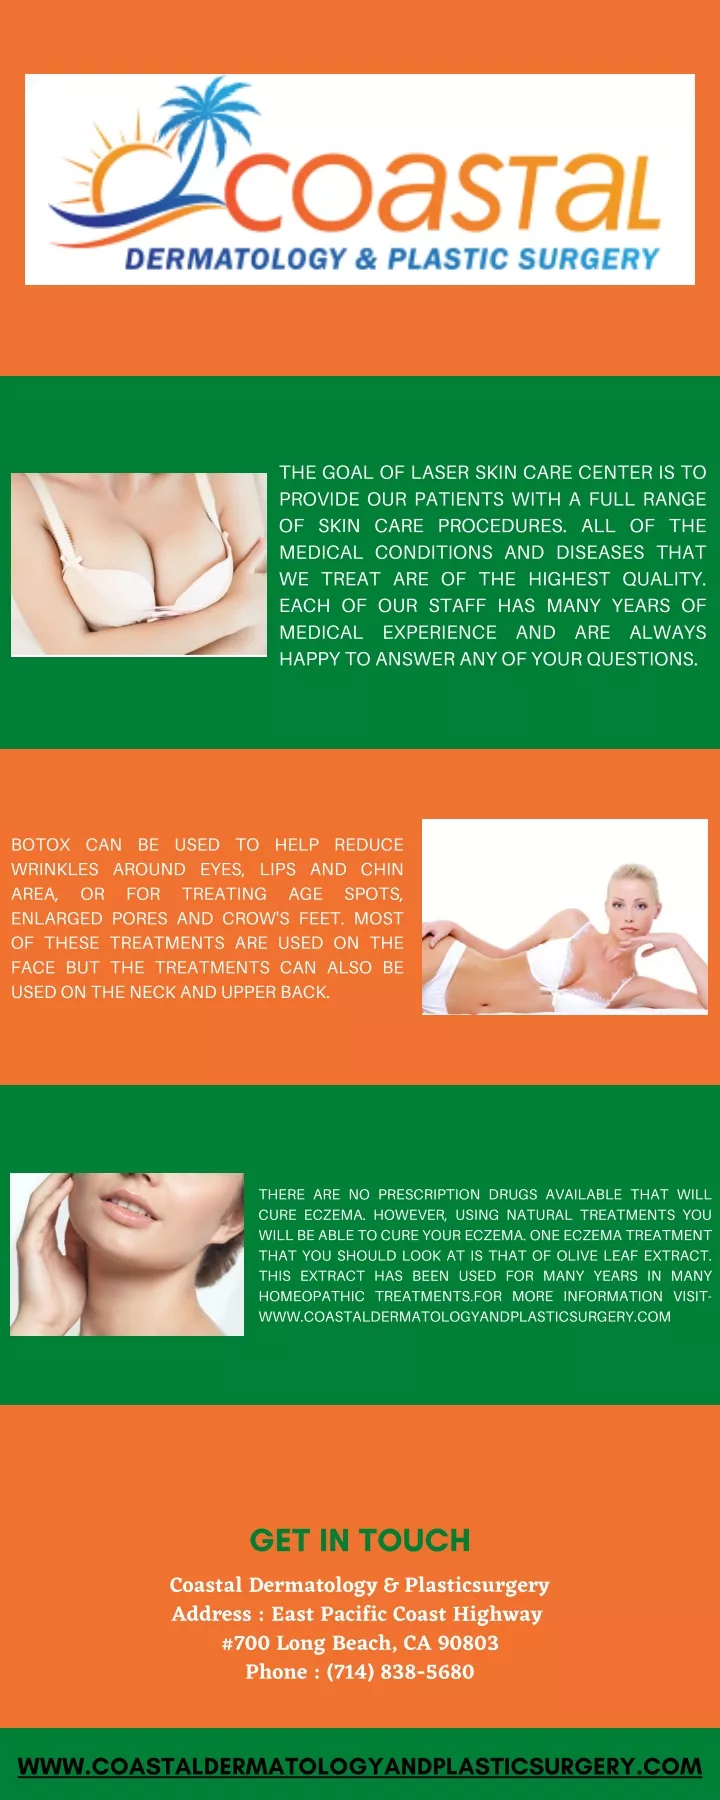 the goal of laser skin care center is to